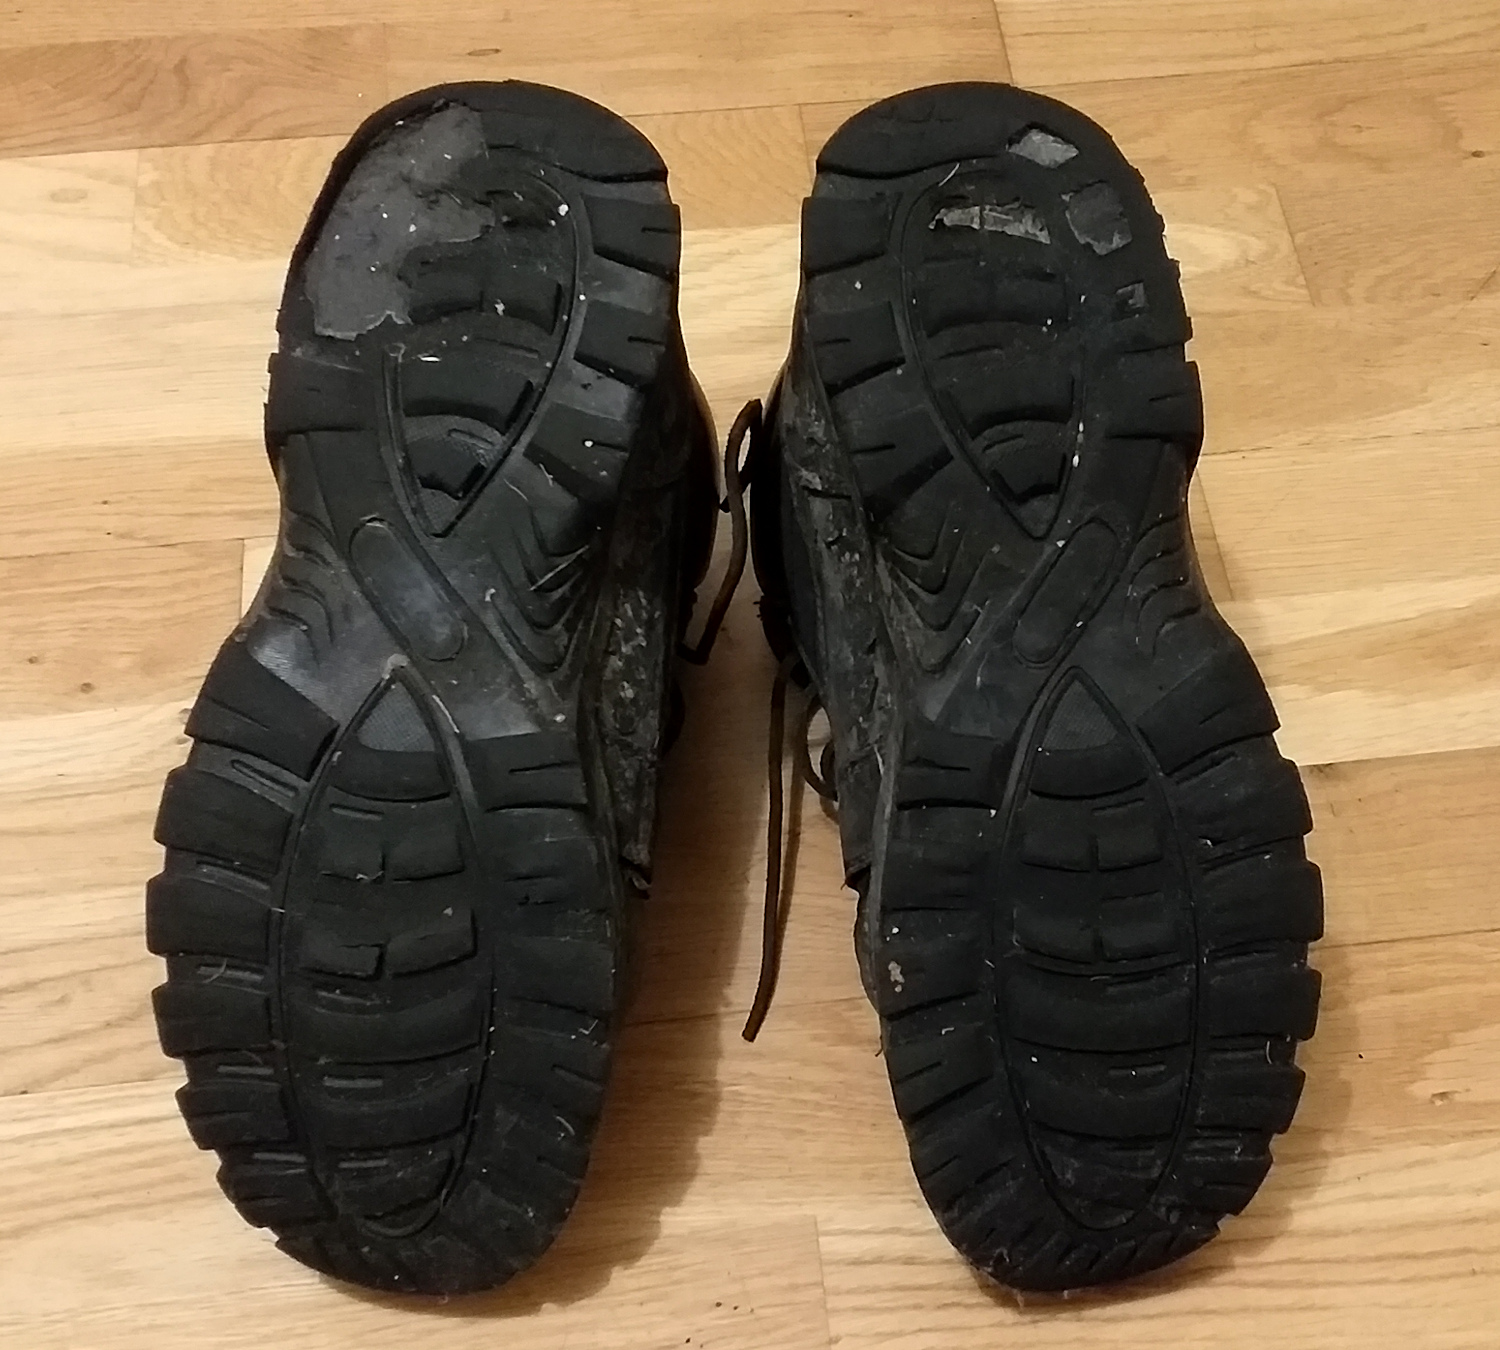 What the soles look like after 2 years of intermittent use